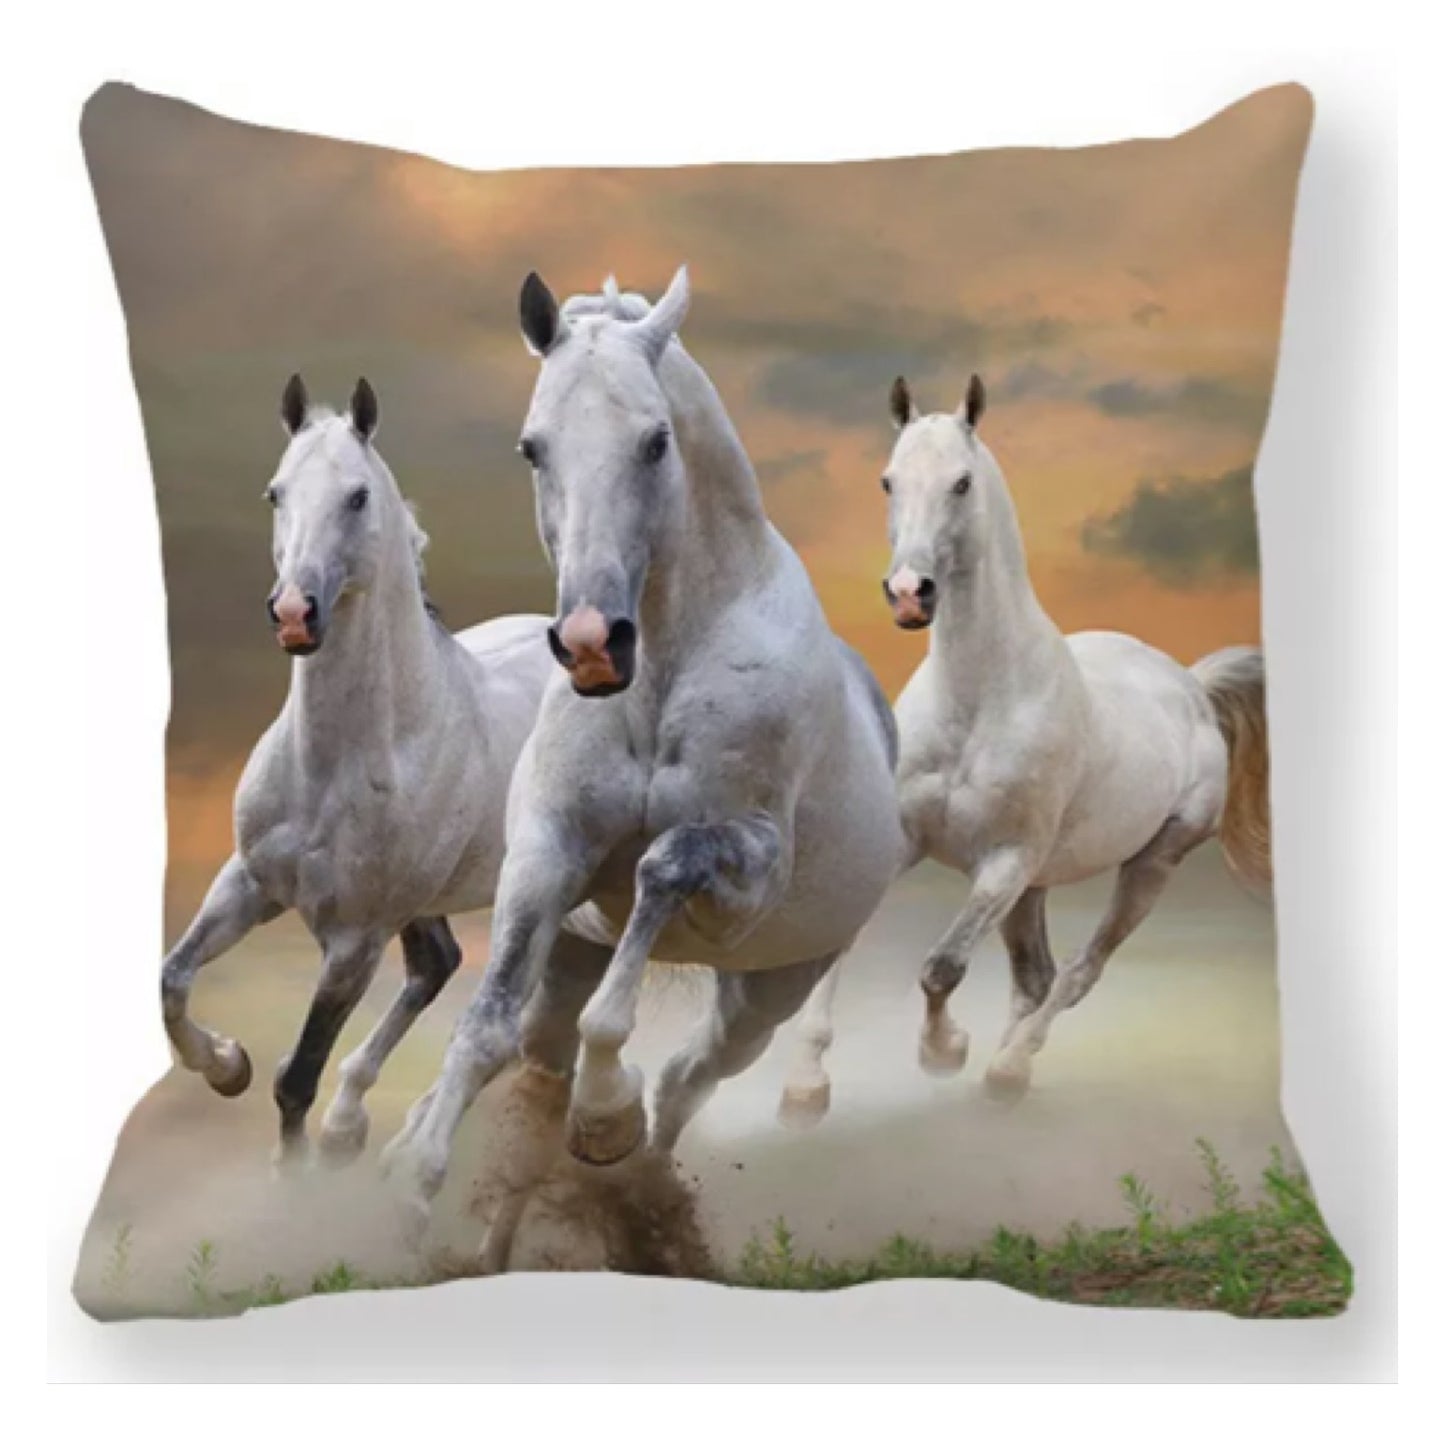 Cushion Cover Horse White Wild Three - The Renmy Store Homewares & Gifts 